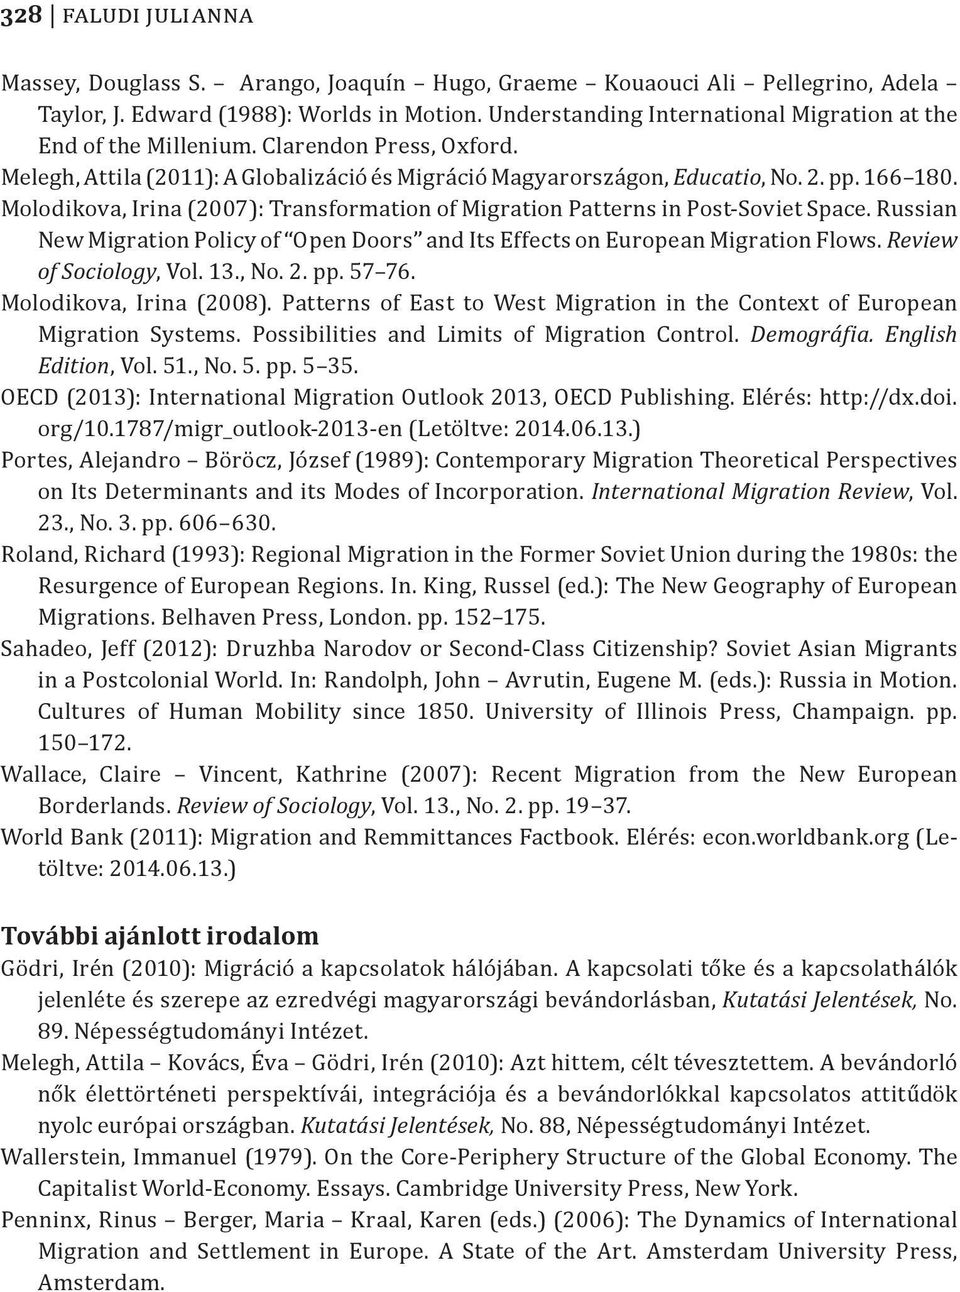 Molodikova, Irina (2007): Transformation of Migration Patterns in Post-Soviet Space. Russian New Migration Policy of Open Doors and Its Effects on European Migration Flows. Review of Sociology, Vol.